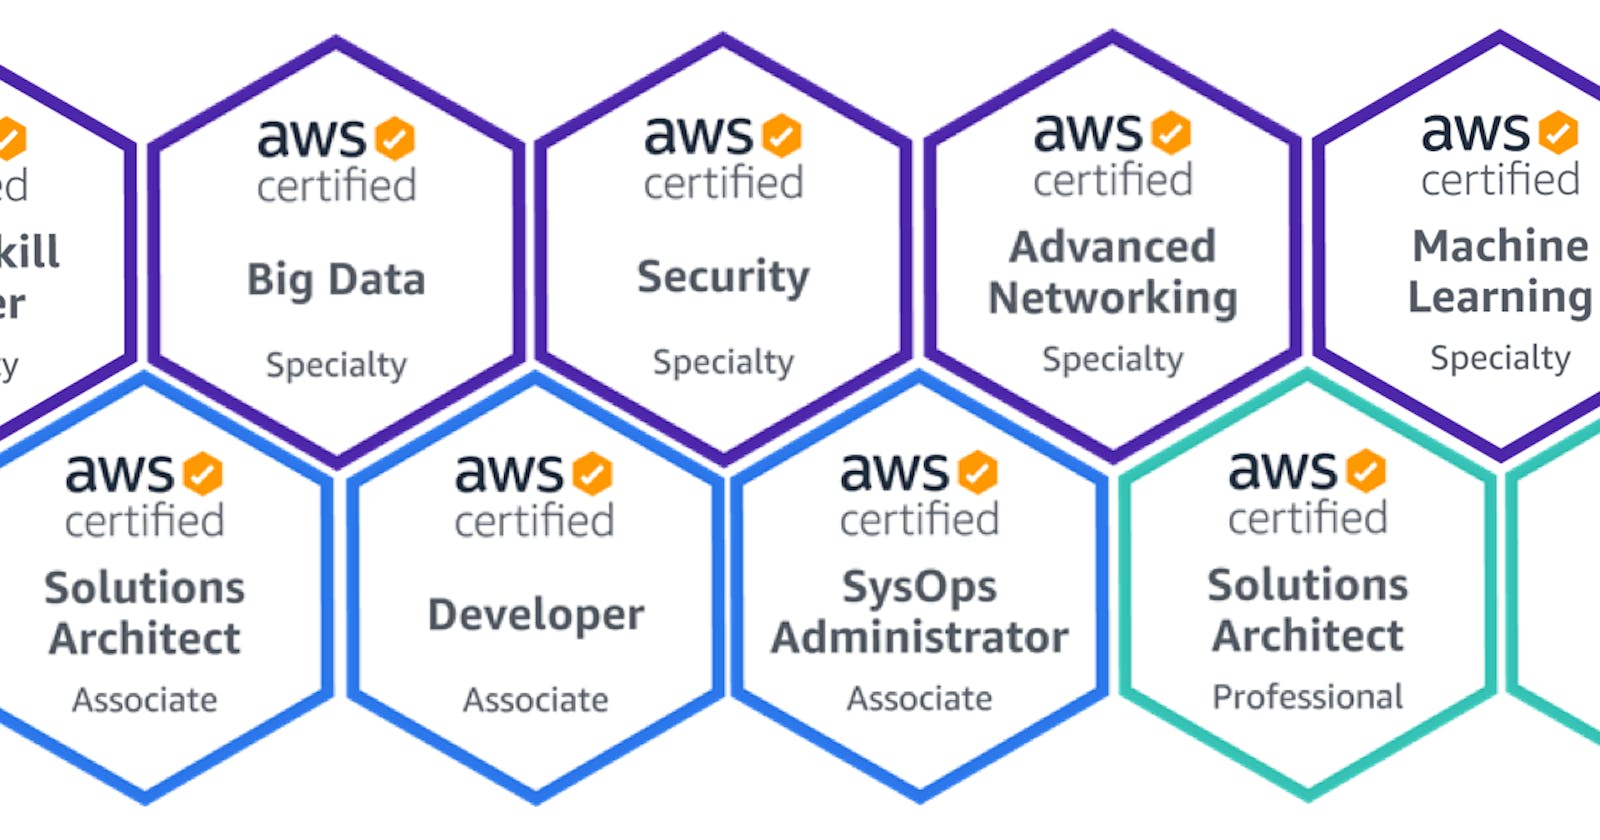 The Complete Guide to AWS Certification Levels